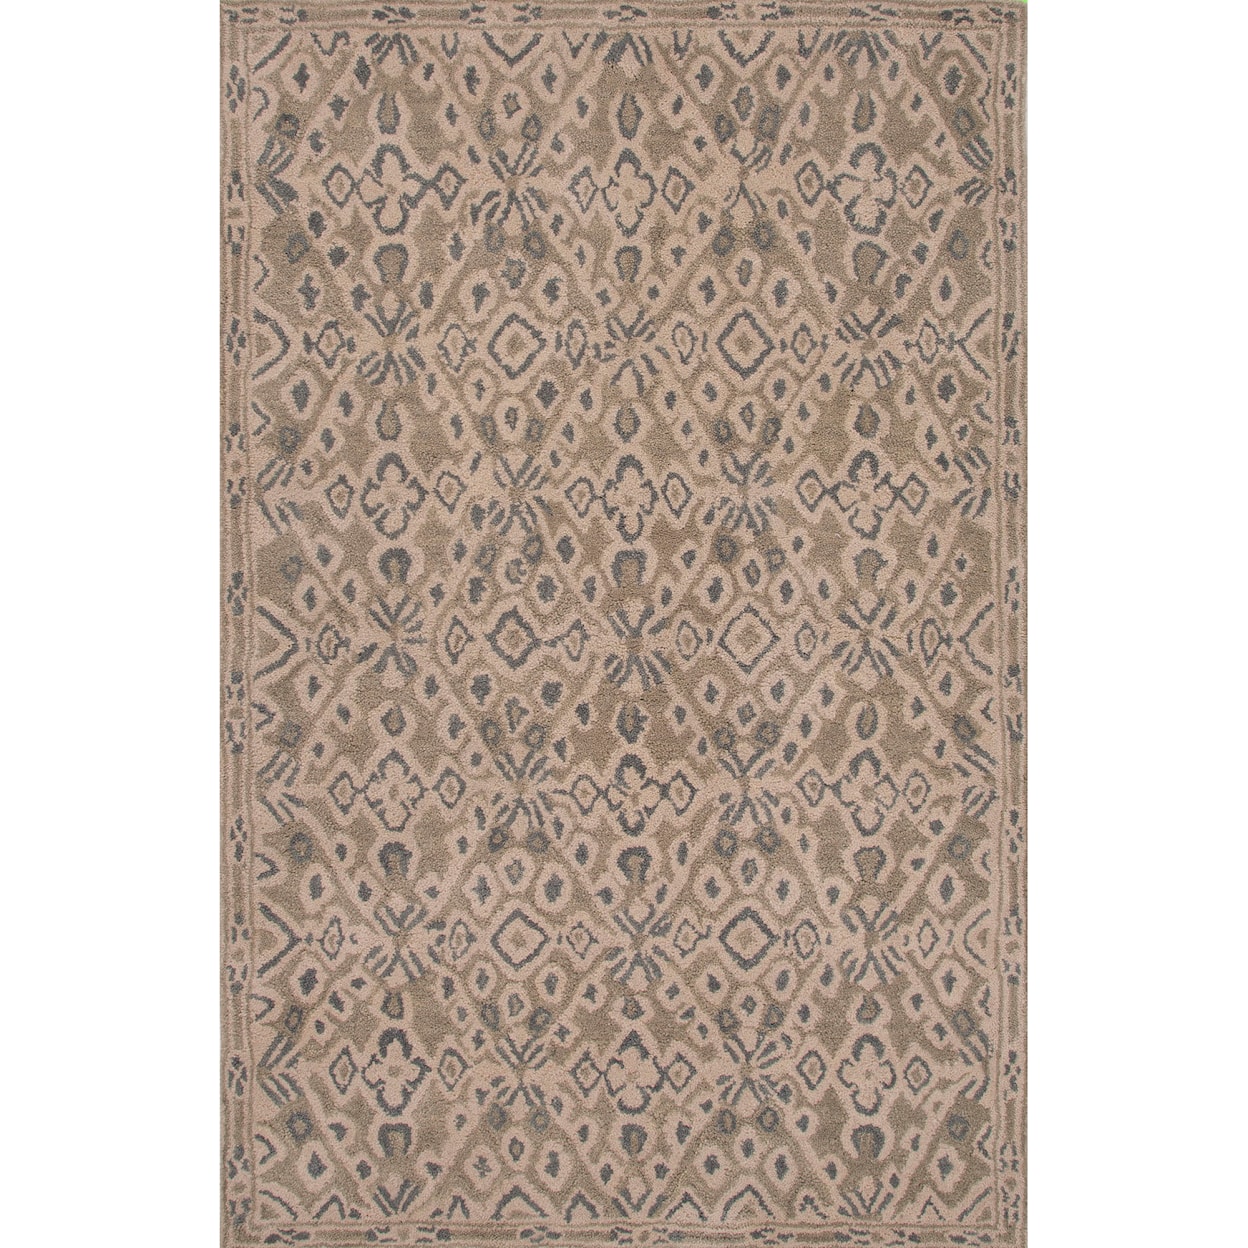 JAIPUR Rugs Traditions Made Modern Tufted 5 x 8 Rug